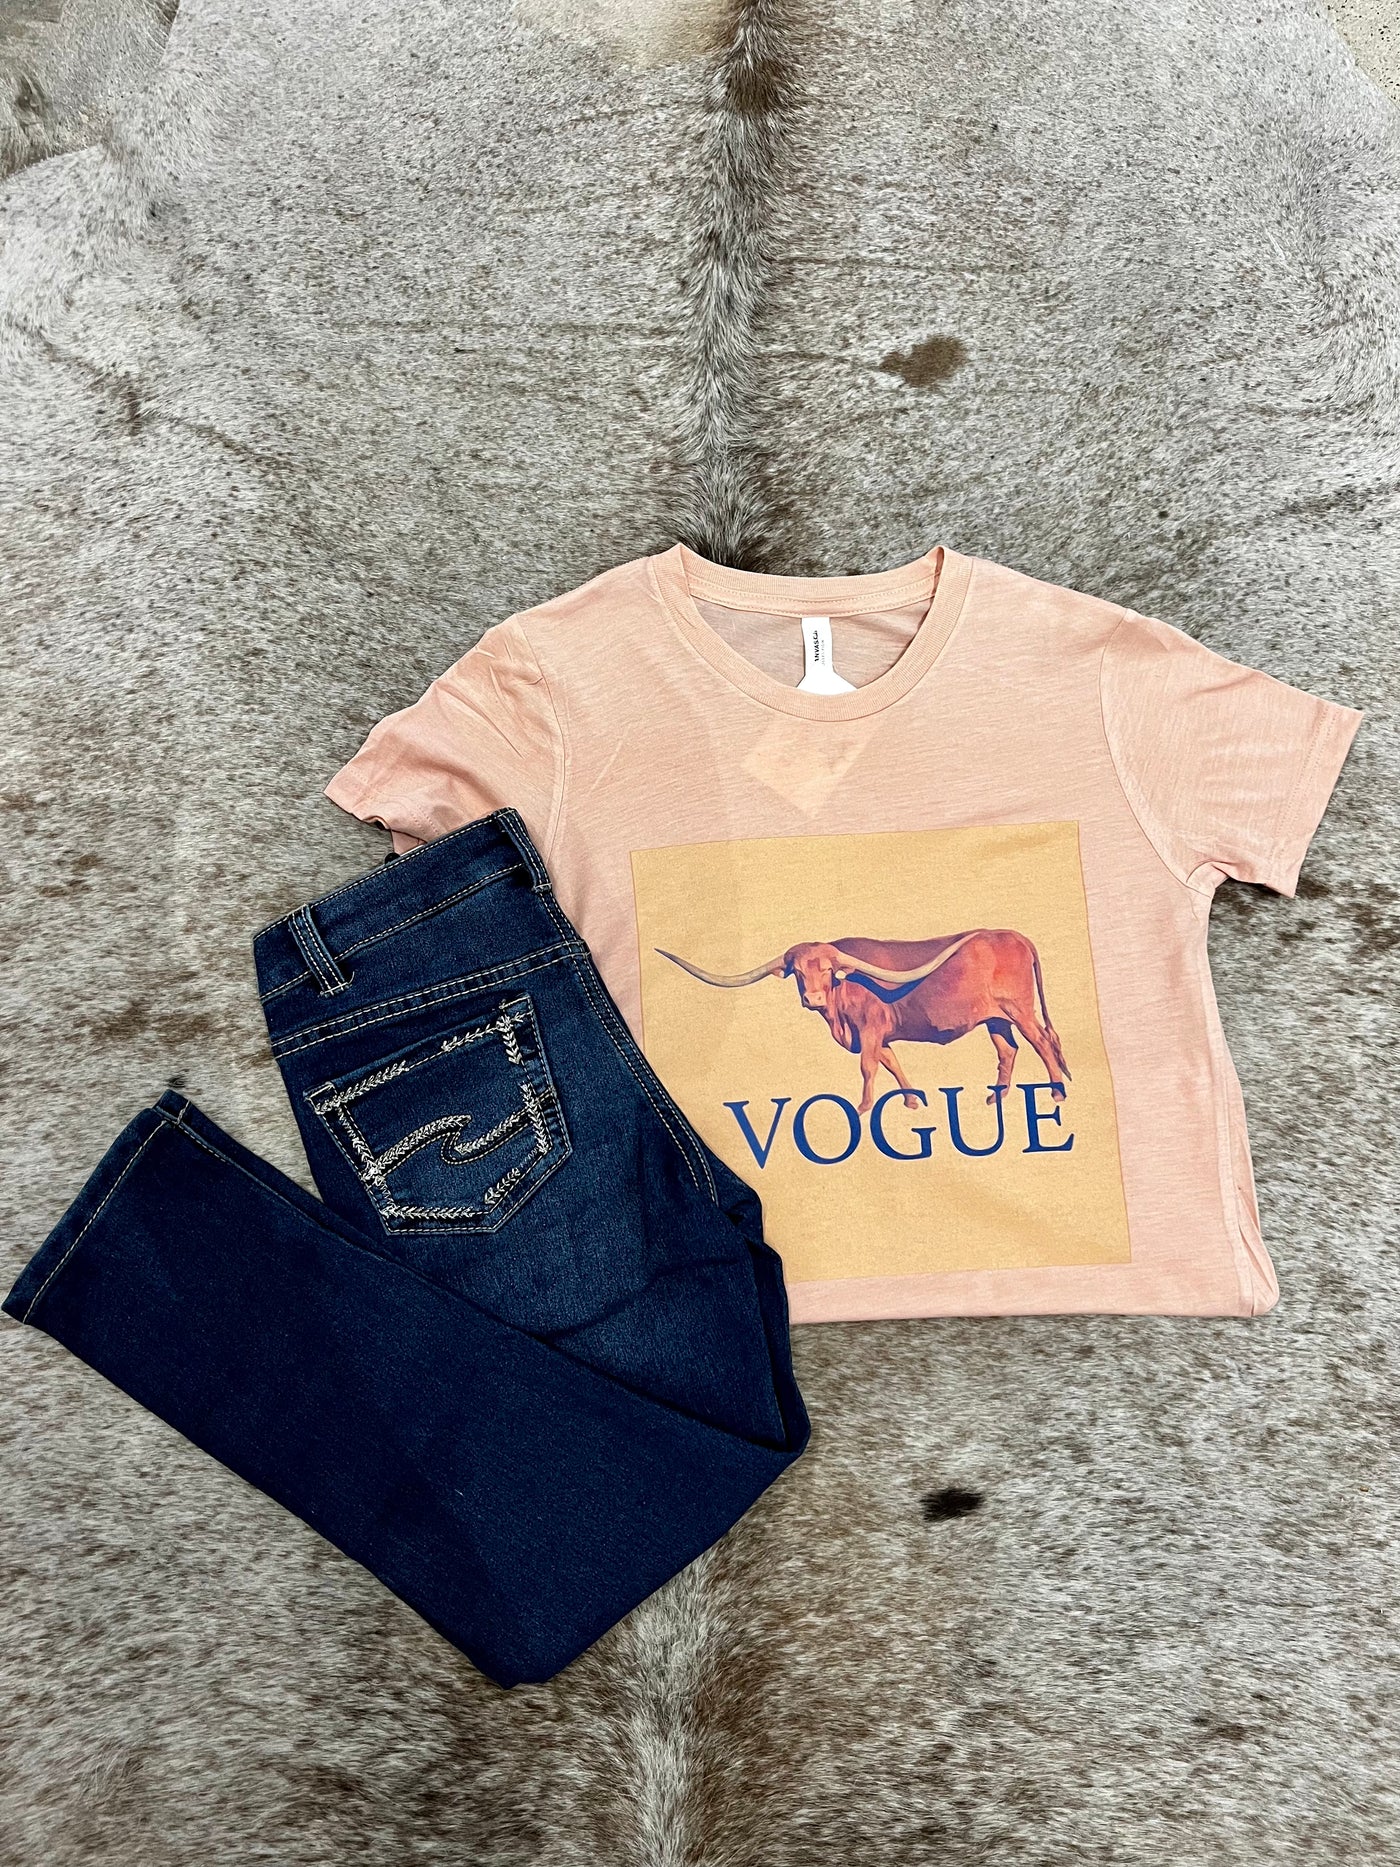 G3 Betty Made Vogue Youth Tee